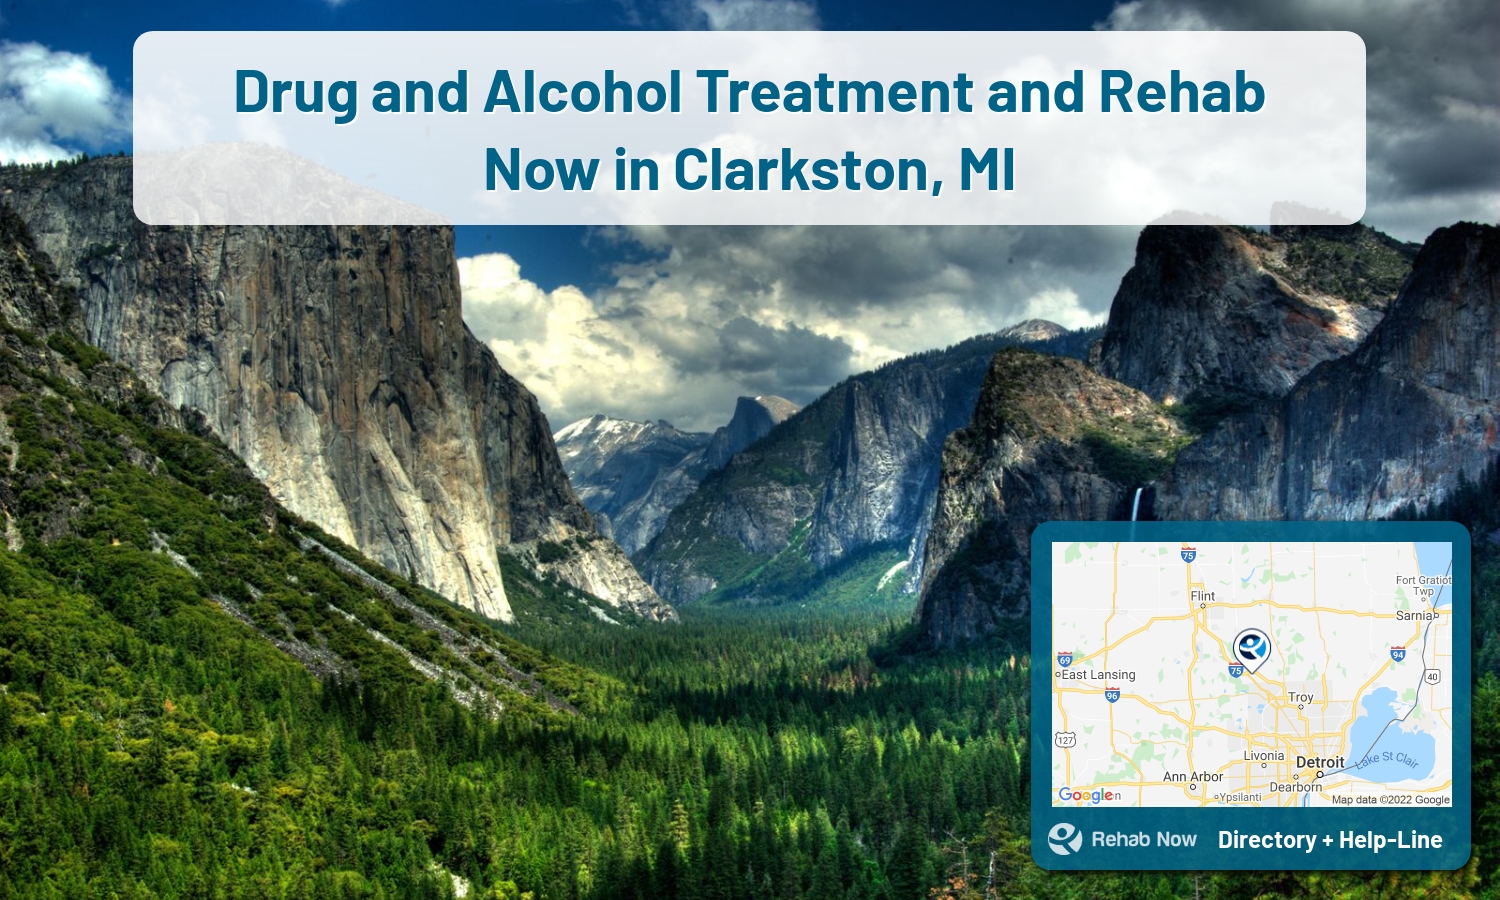 Our experts can help you find treatment now in Clarkston, Michigan. We list drug rehab and alcohol centers in Michigan.